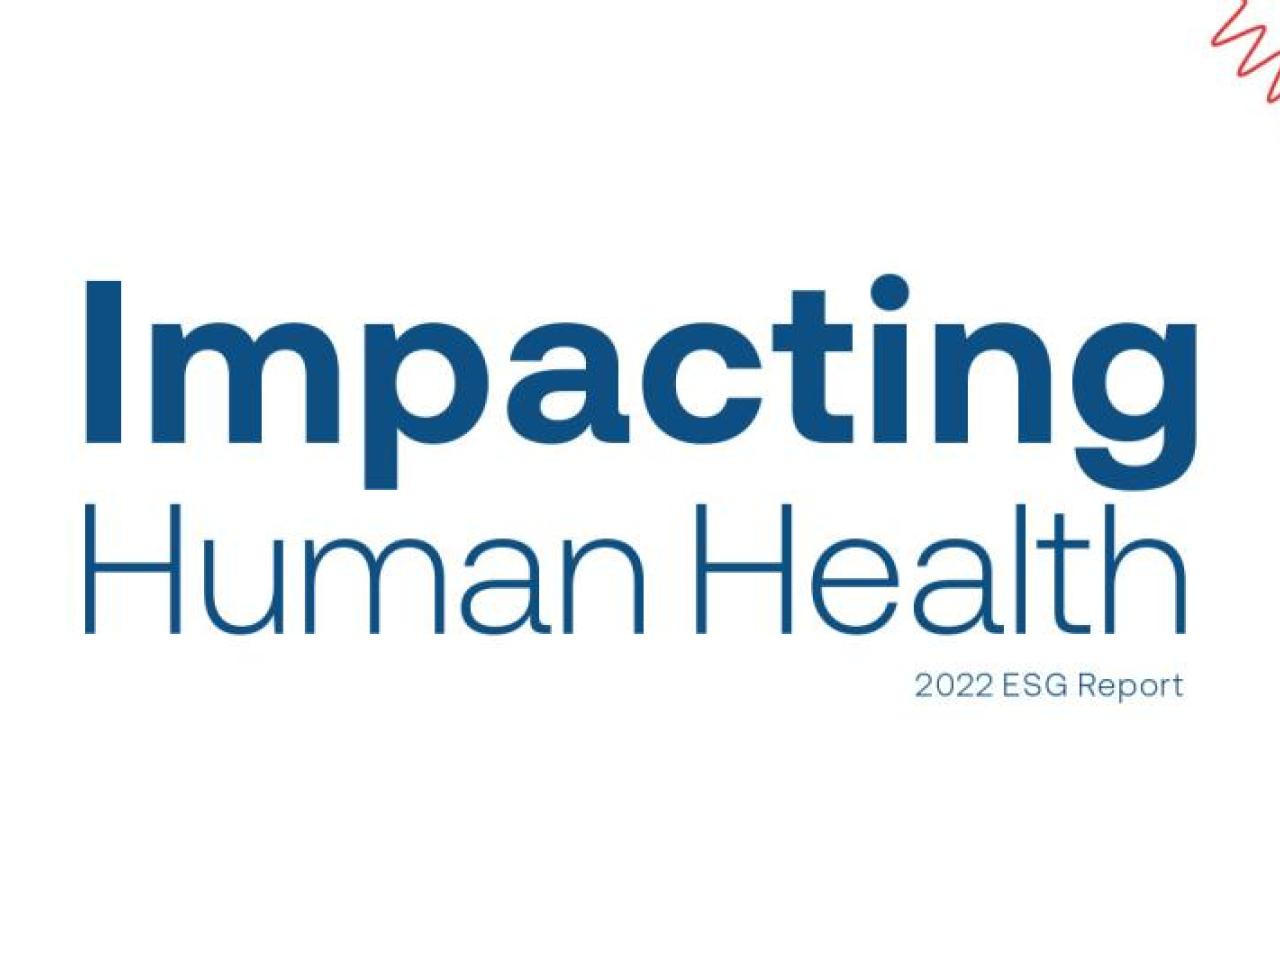 Moderna's report covering, which reads, "Impacting Human Health: 2022 ESG Report"